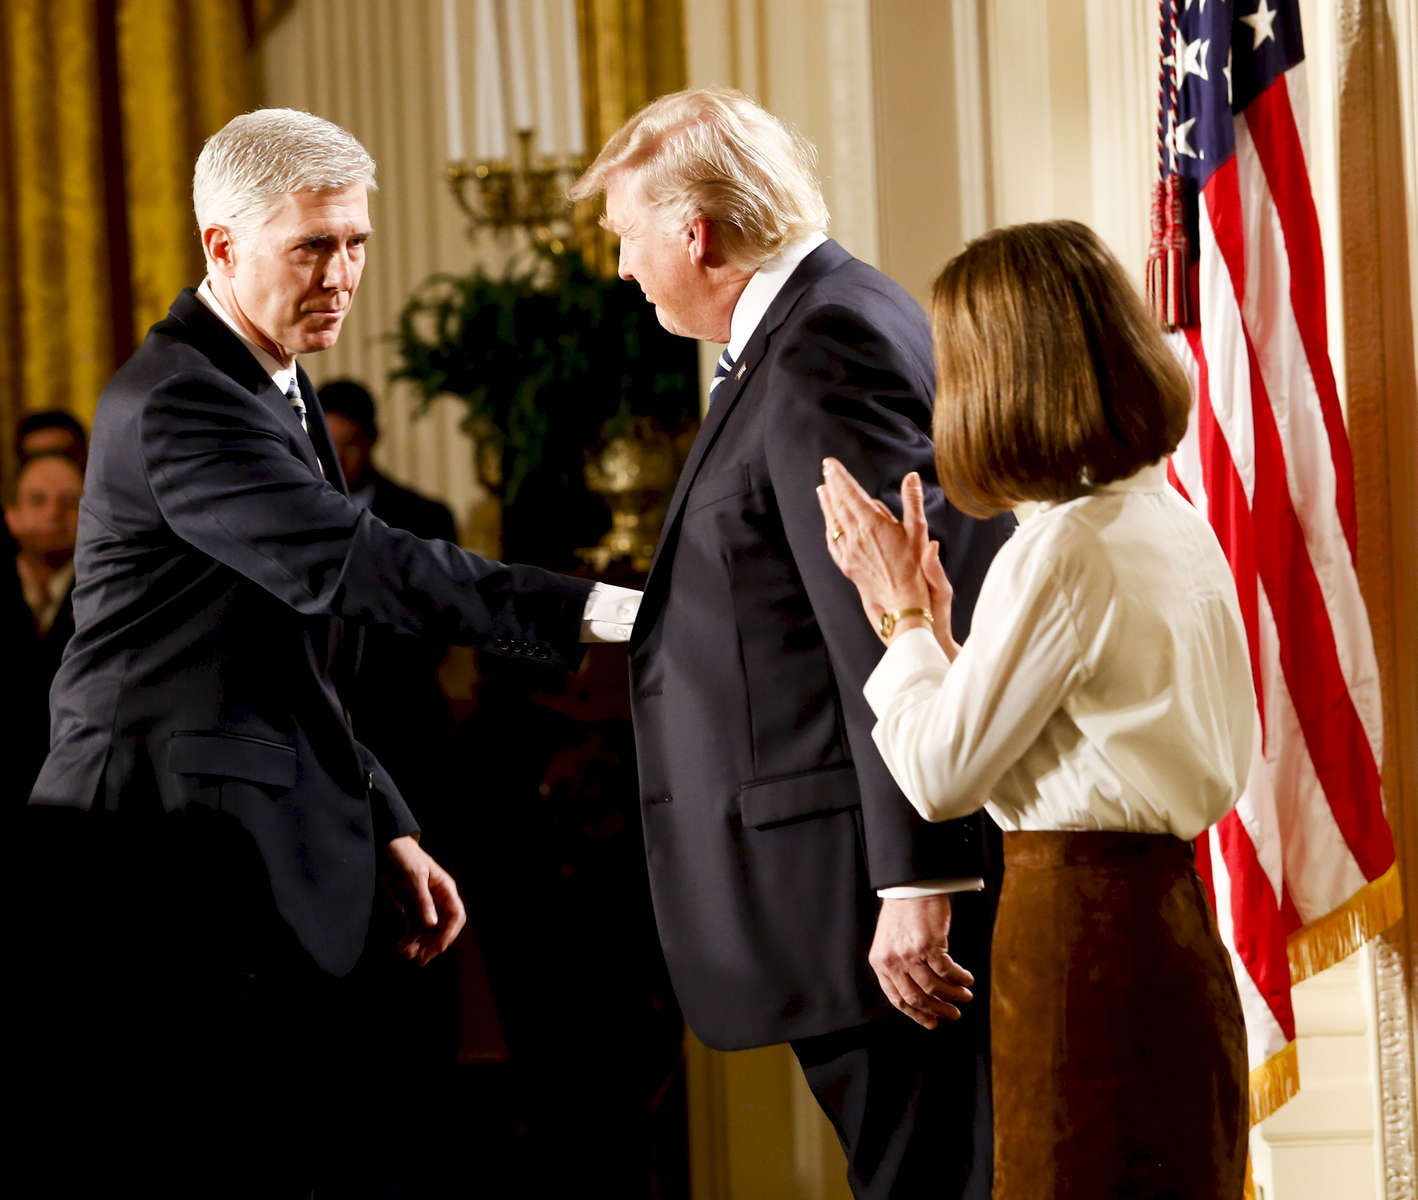 U.S. President Donald Trump shakes hands with nominate Judge Neil Gorsuch to the Supreme Court, in the East Room of the White House.